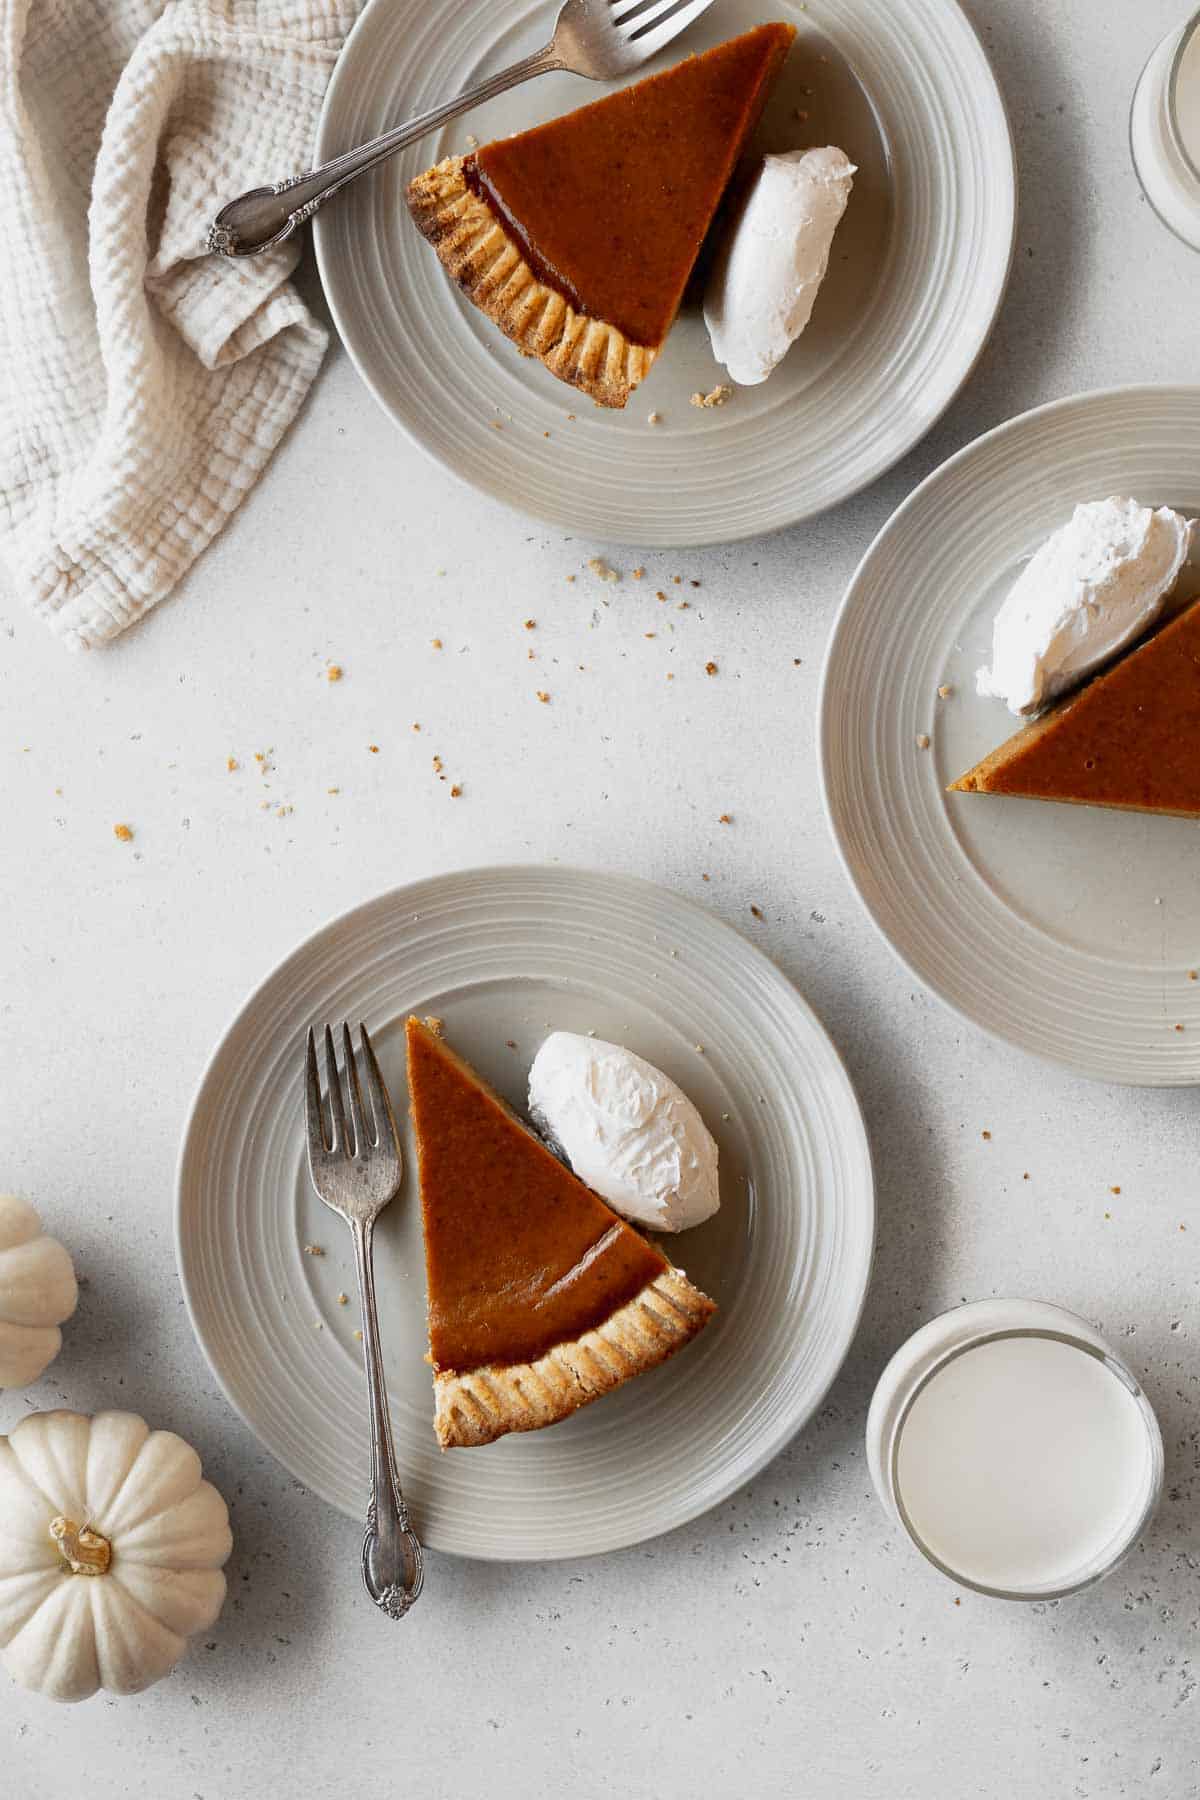 Overhead shot of 3 dairy-free pumpkin pie slices on plates with whipped cream and a couple forks.